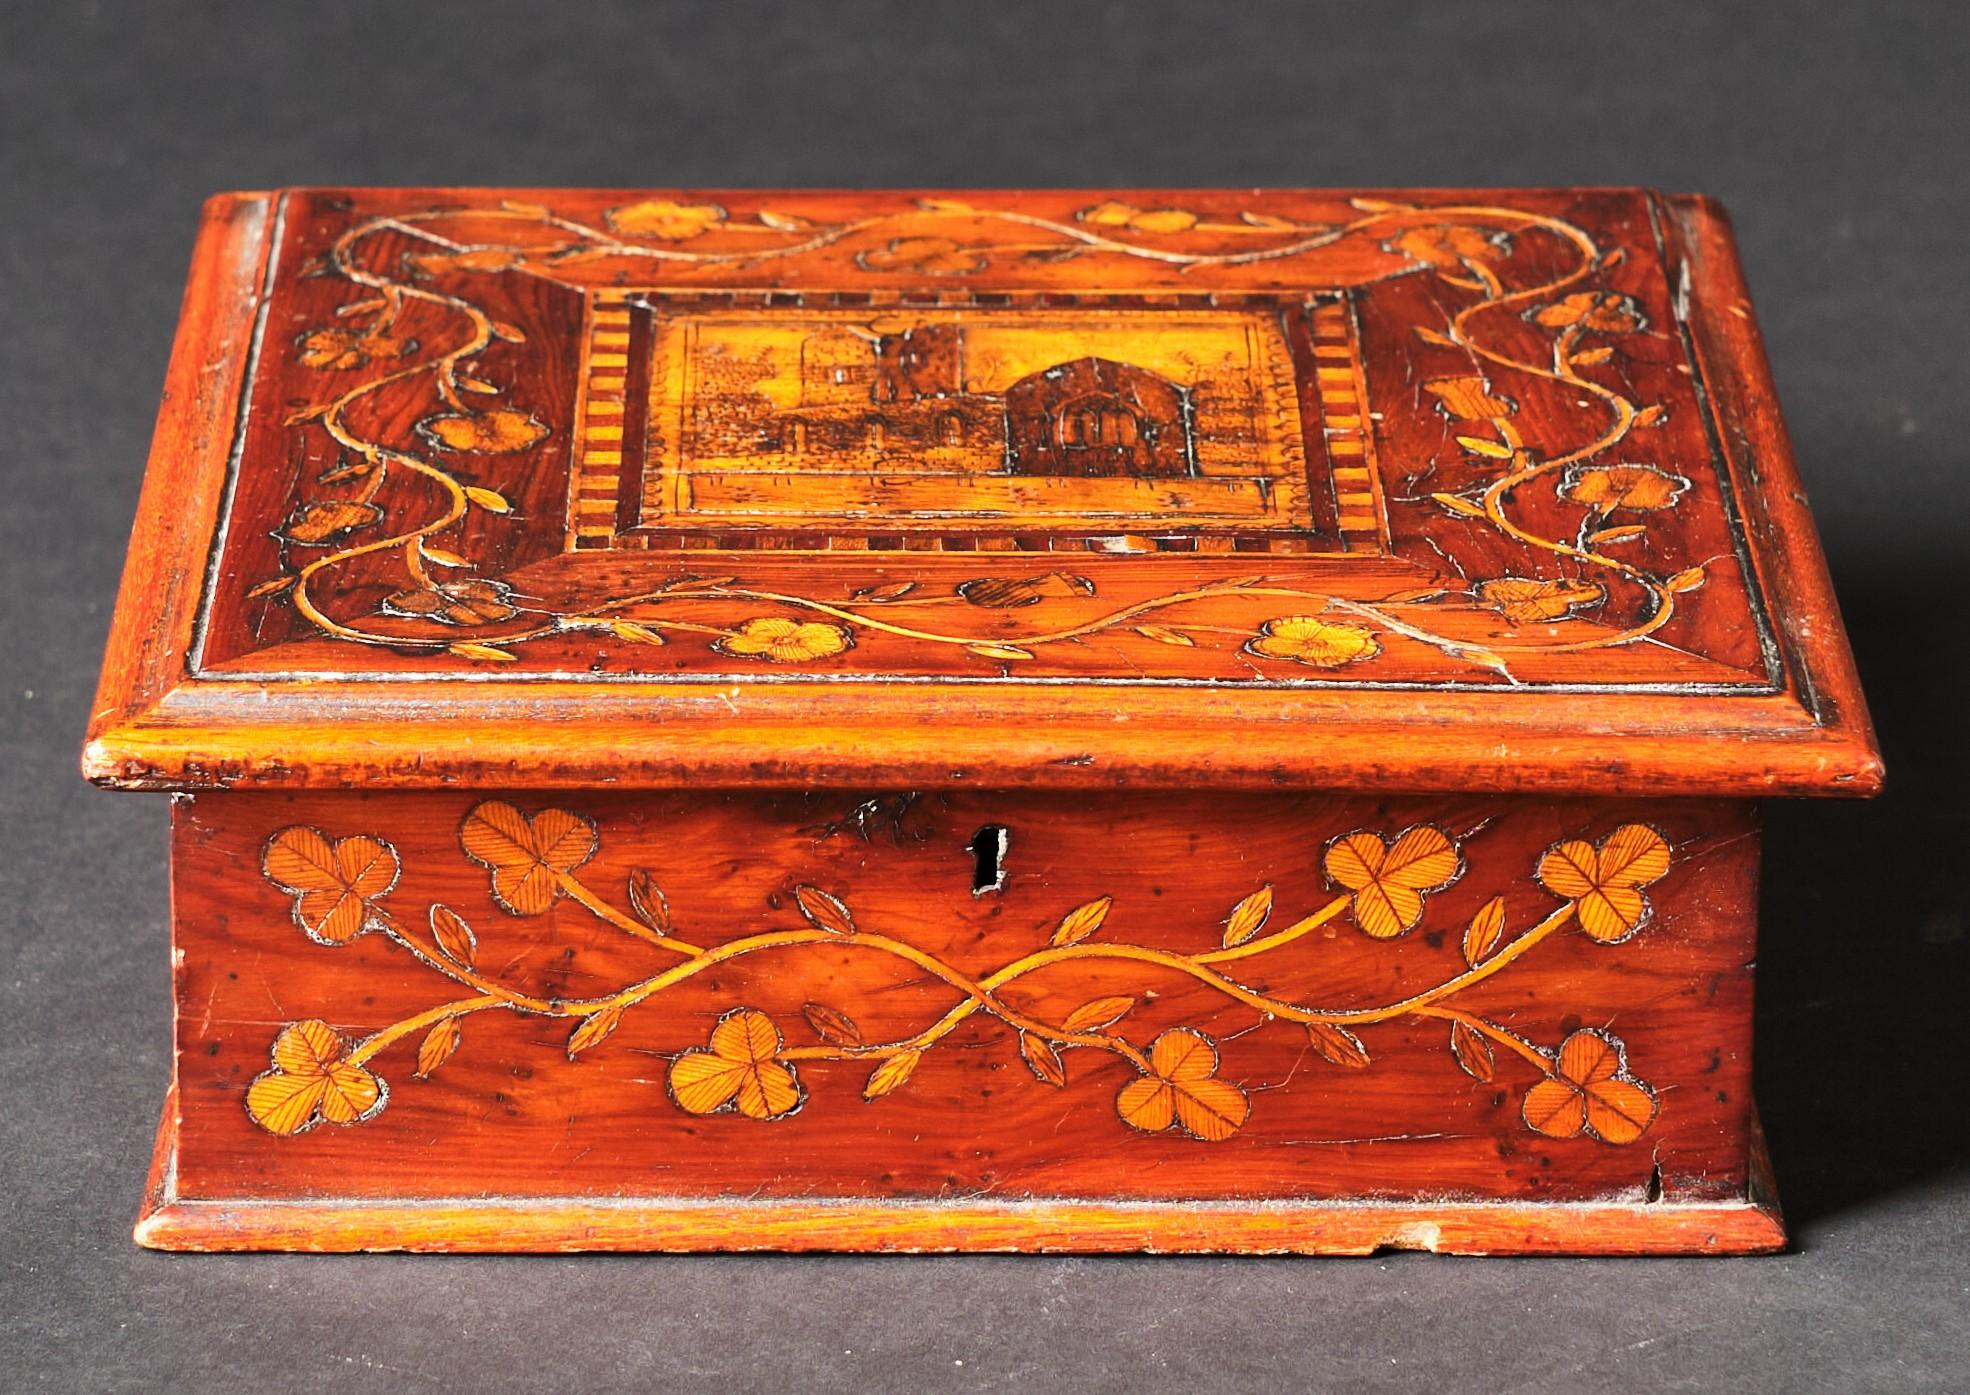 A very handsome 19th century dresser box hand constructed in Arbutus wood. The hinged lid featuring an intricately inlaid marquetry panel depicting Muckross Abbey surrounded by inlaid motifs of meandering vines, thistles & shamrocks. The interior